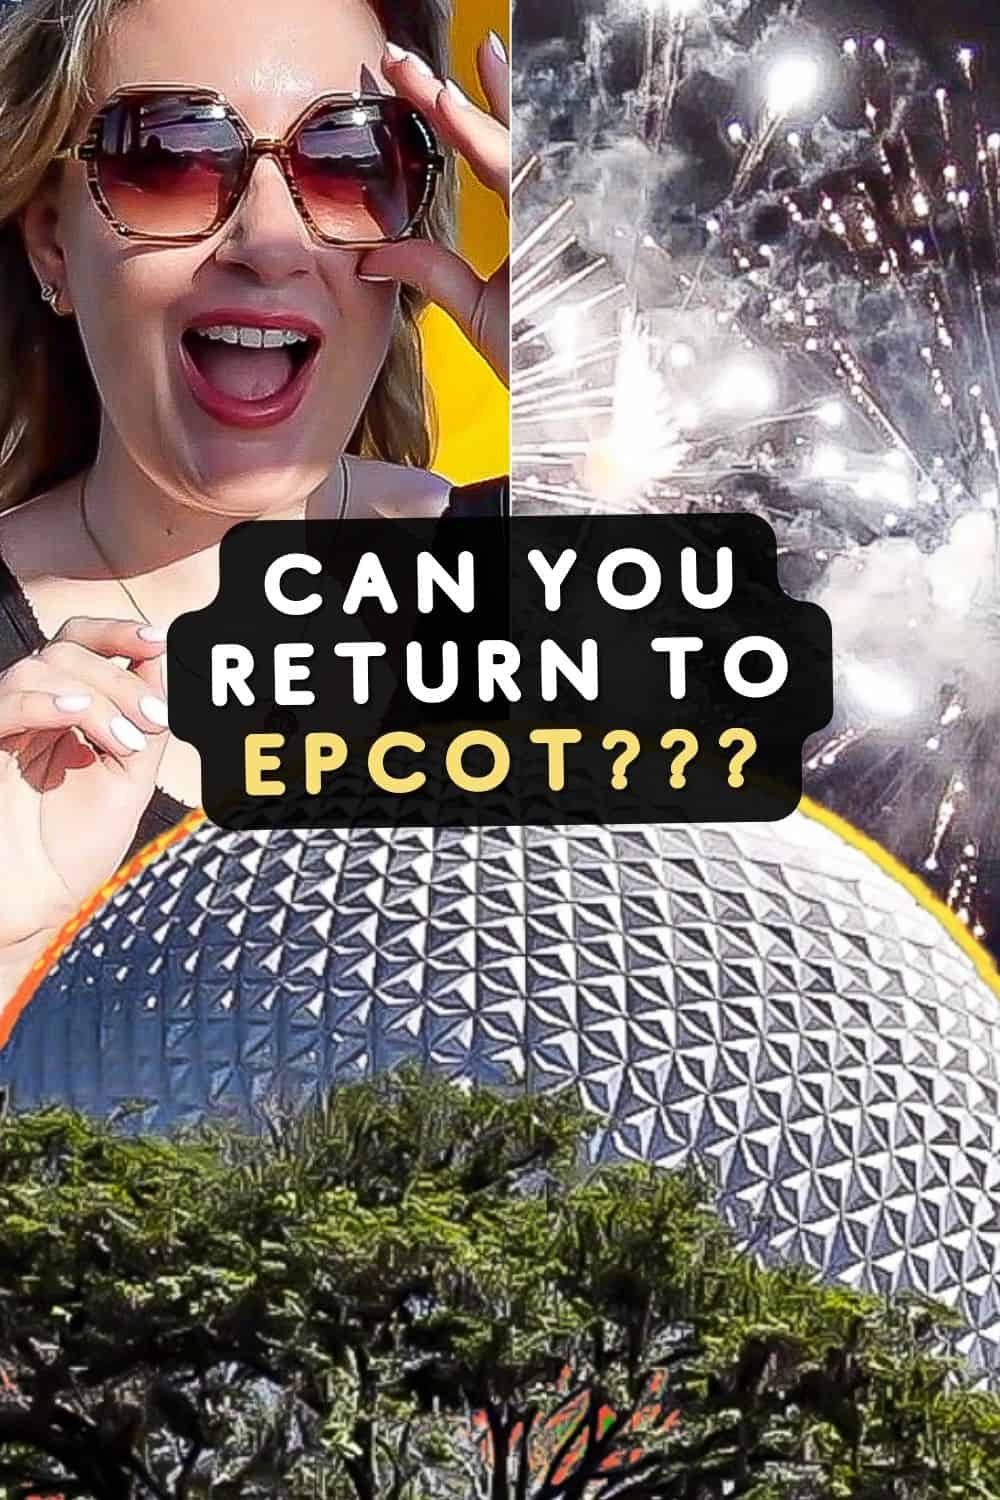 Returning to Epcot after leaving